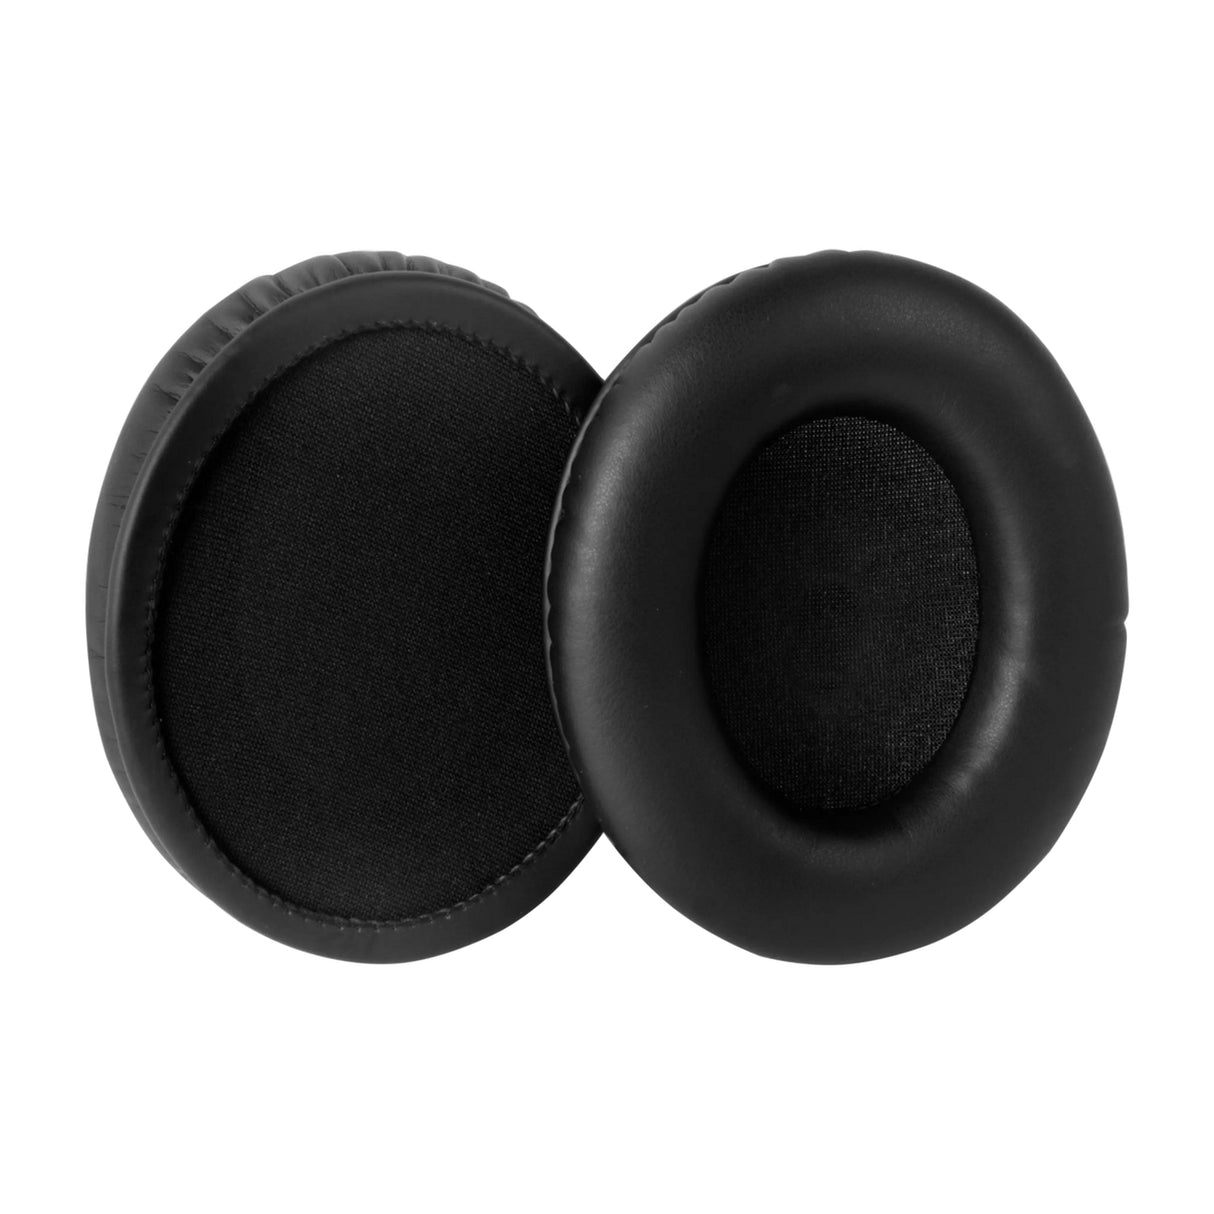 Shure SRH840A-PADS Replacement Earpads for SRH840A, Pair